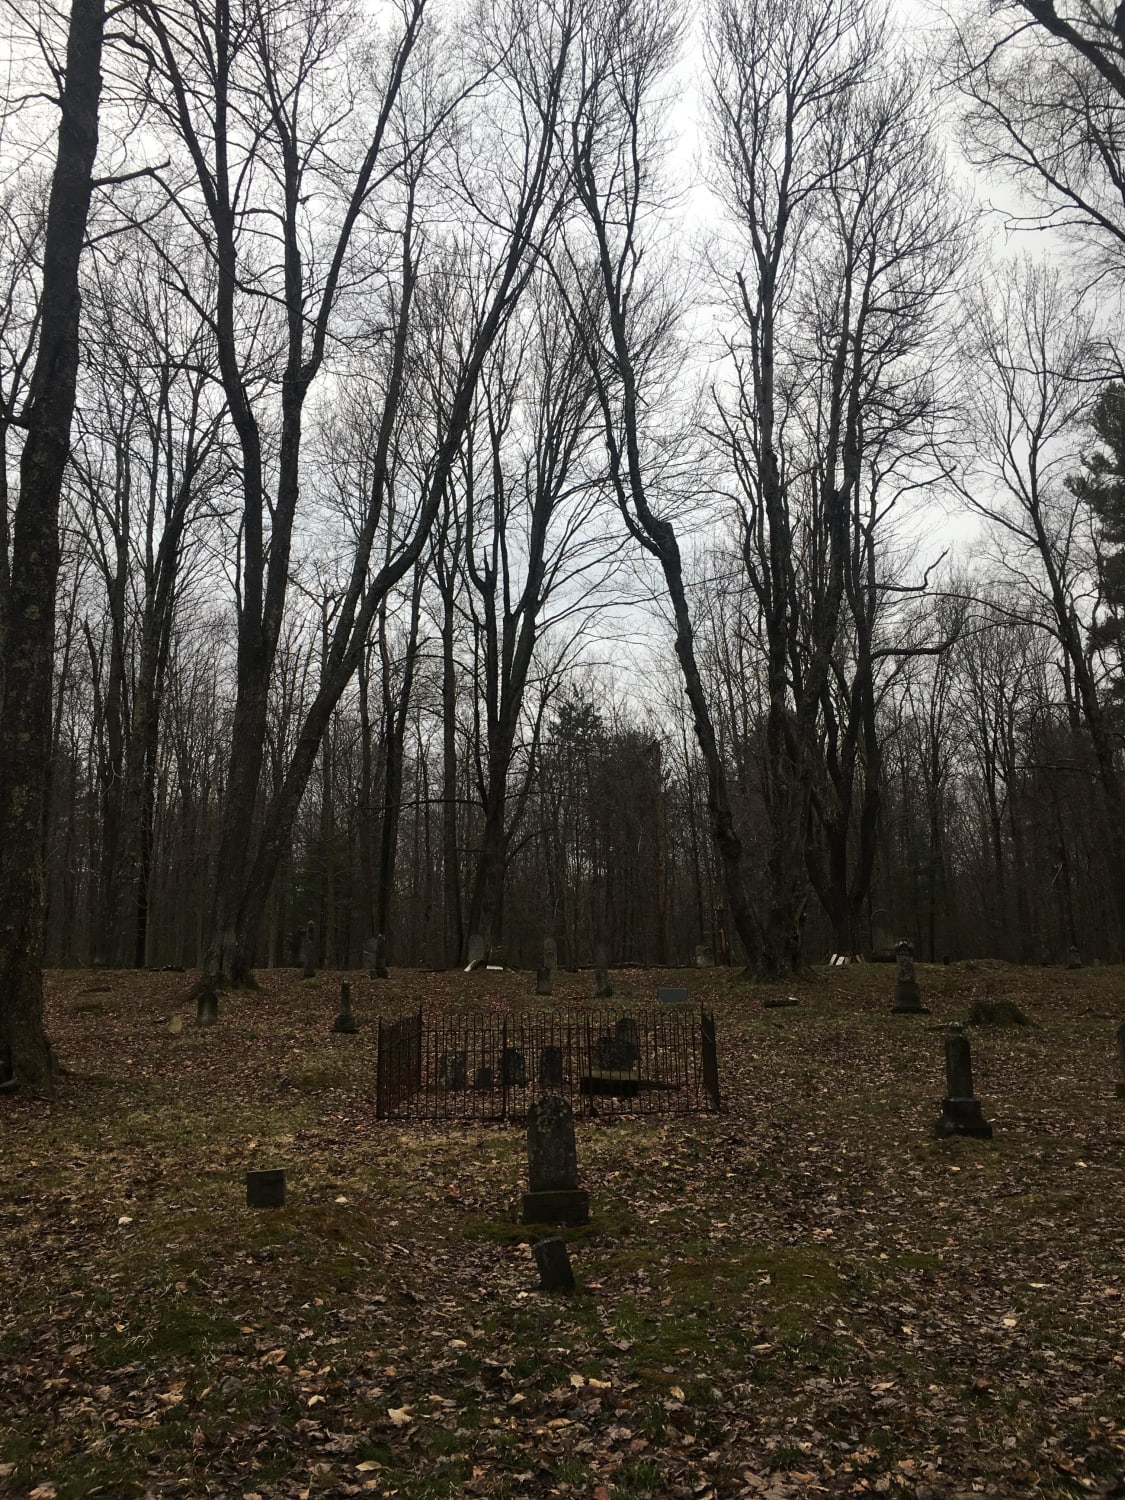 barclay, pennsylvania was mostly wiped out by the plague, and the industrial revolution finished the job. all that remains is an abandoned cemetery on state game lands.